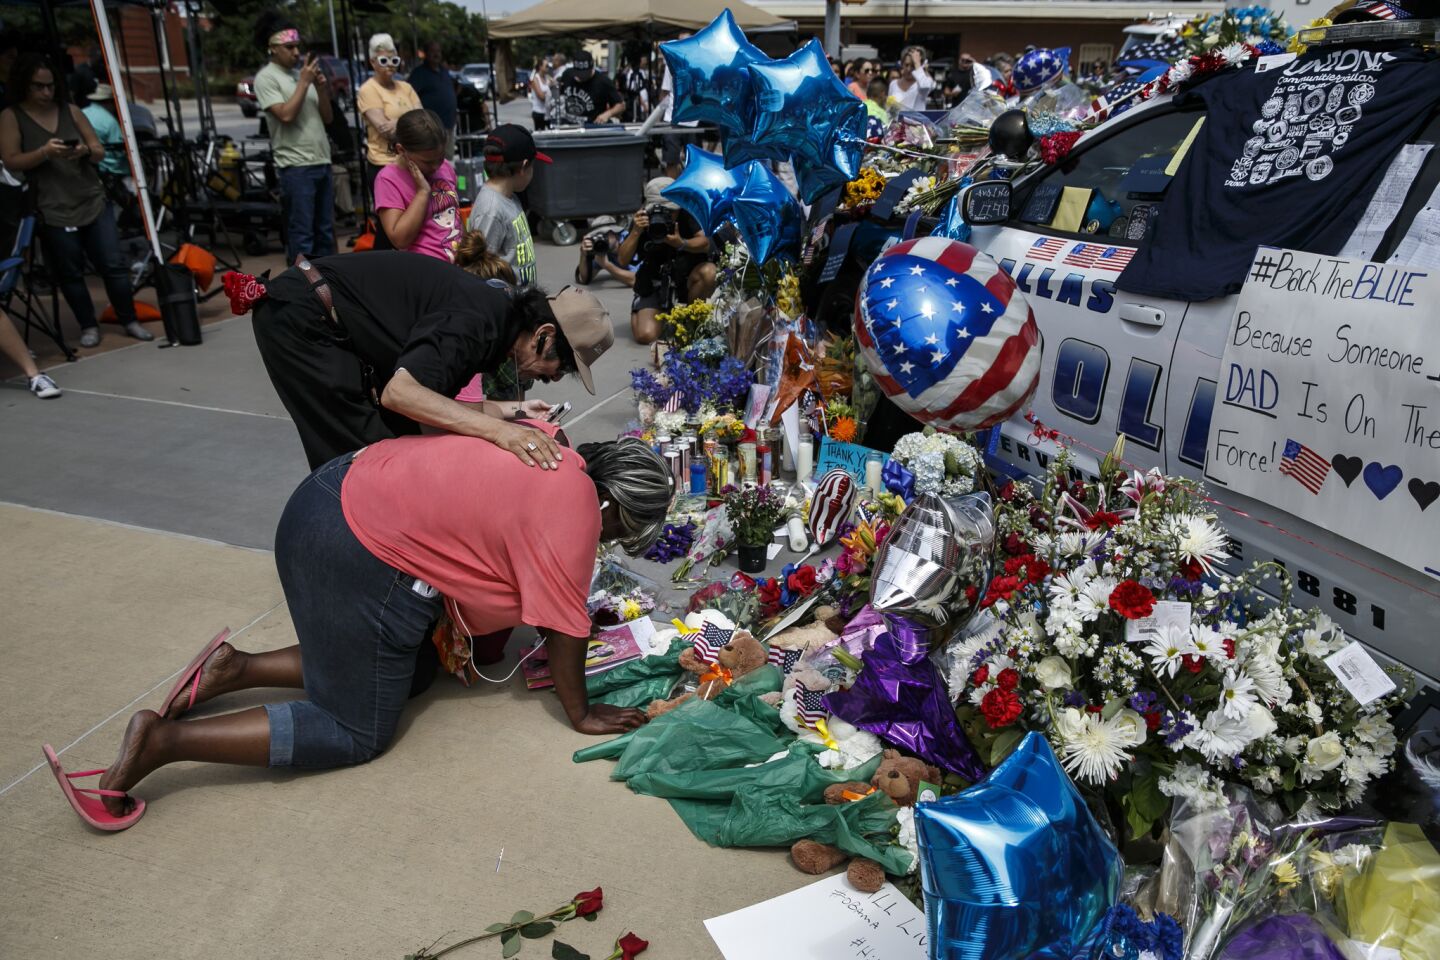 Djuana Franklin is consoled by a passerby as she weeps at the memorial for slain police officers in Dallas.